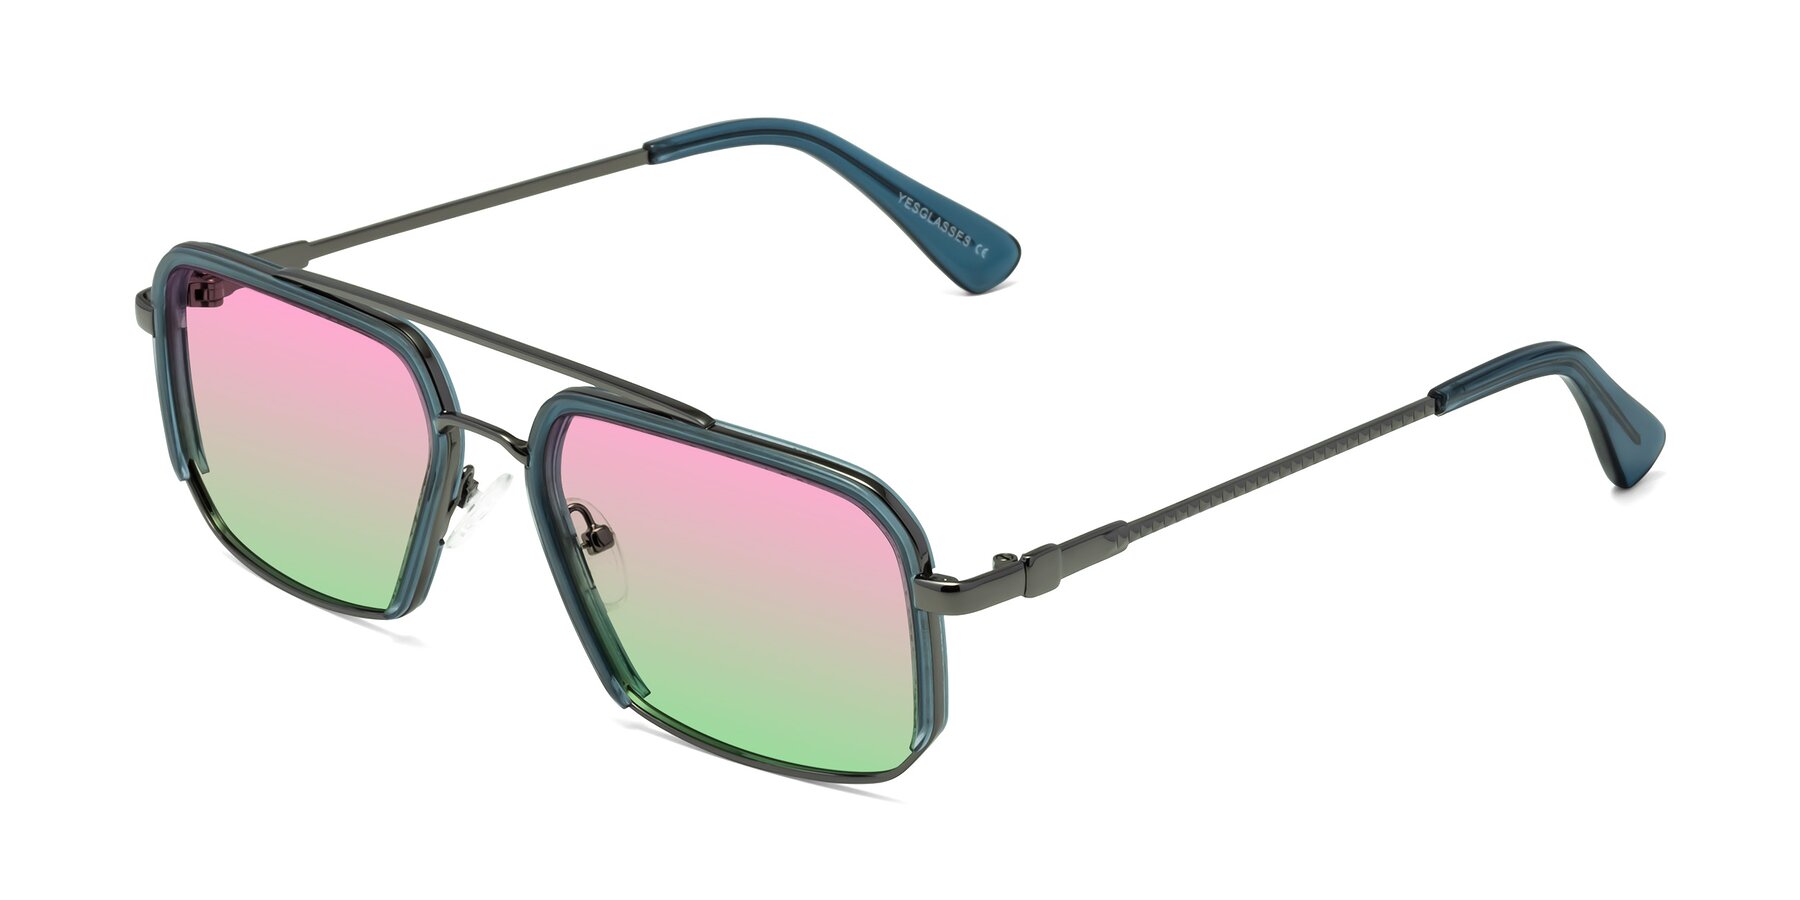 Angle of Dechter in Teal-Gunmetal with Pink / Green Gradient Lenses